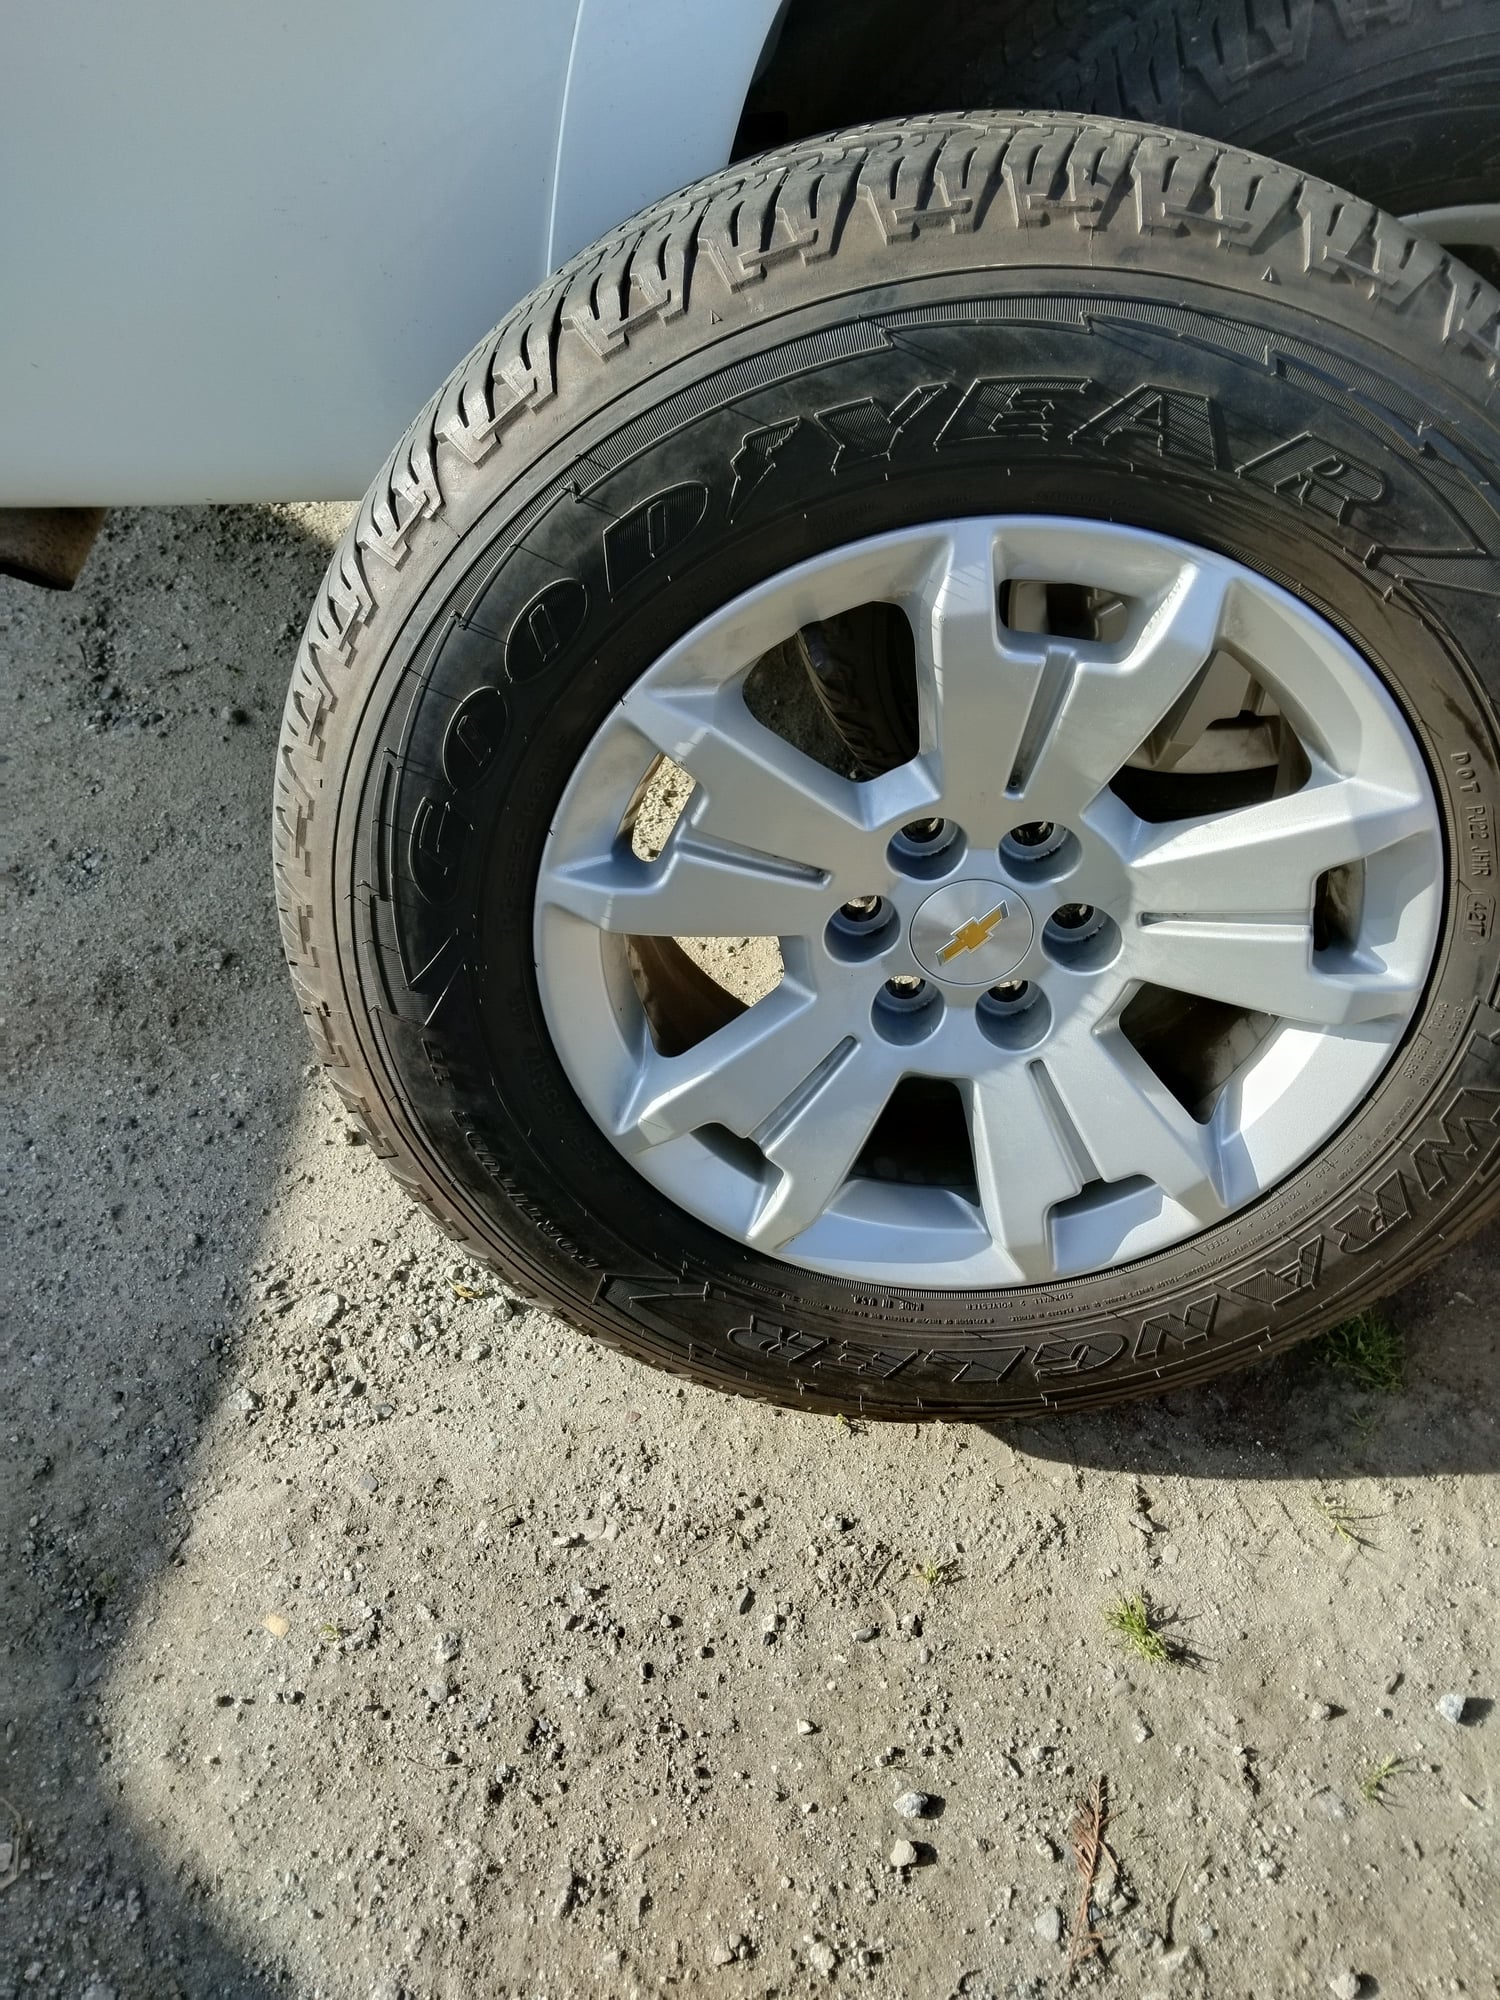 Wheels and Tires/Axles - 4 Chevy rims and tires for sale 6lug - New - All Years Chevrolet All Models - Hollister, CA 95023, United States